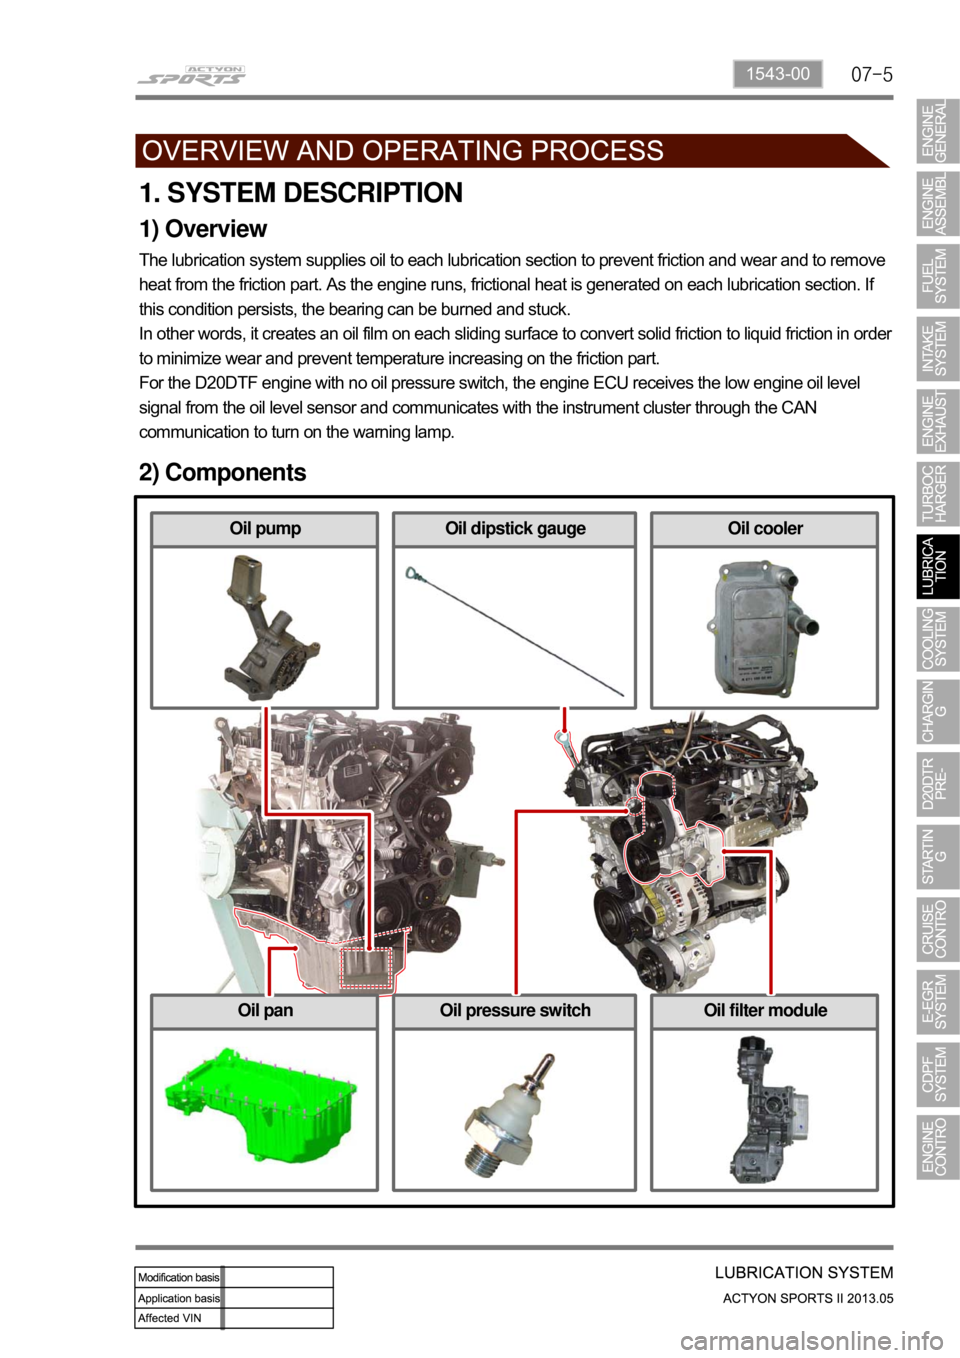 SSANGYONG NEW ACTYON SPORTS 2013  Service Manual 07-51543-00
1. SYSTEM DESCRIPTION
1) Overview
The lubrication system supplies oil to each lubrication section to prevent friction and wear and to remove 
heat from the friction part. As the engine run